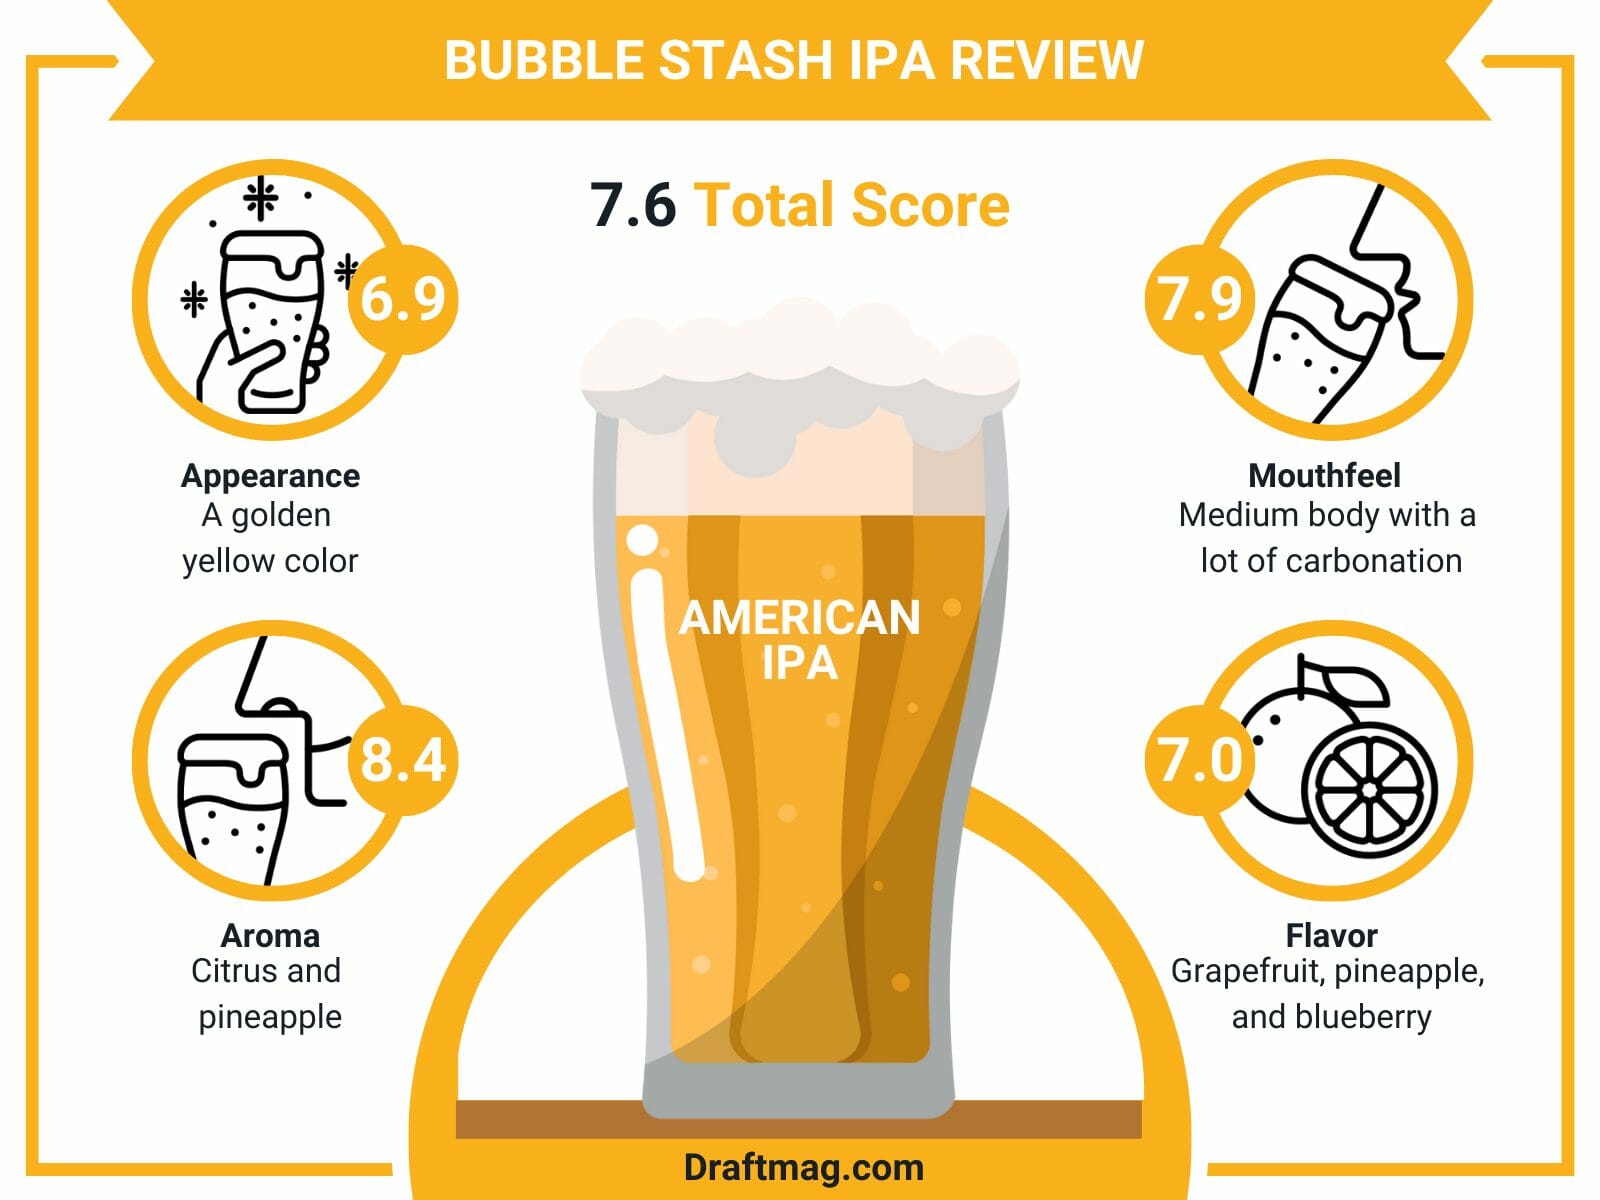 Bubble stash ipa review infographic